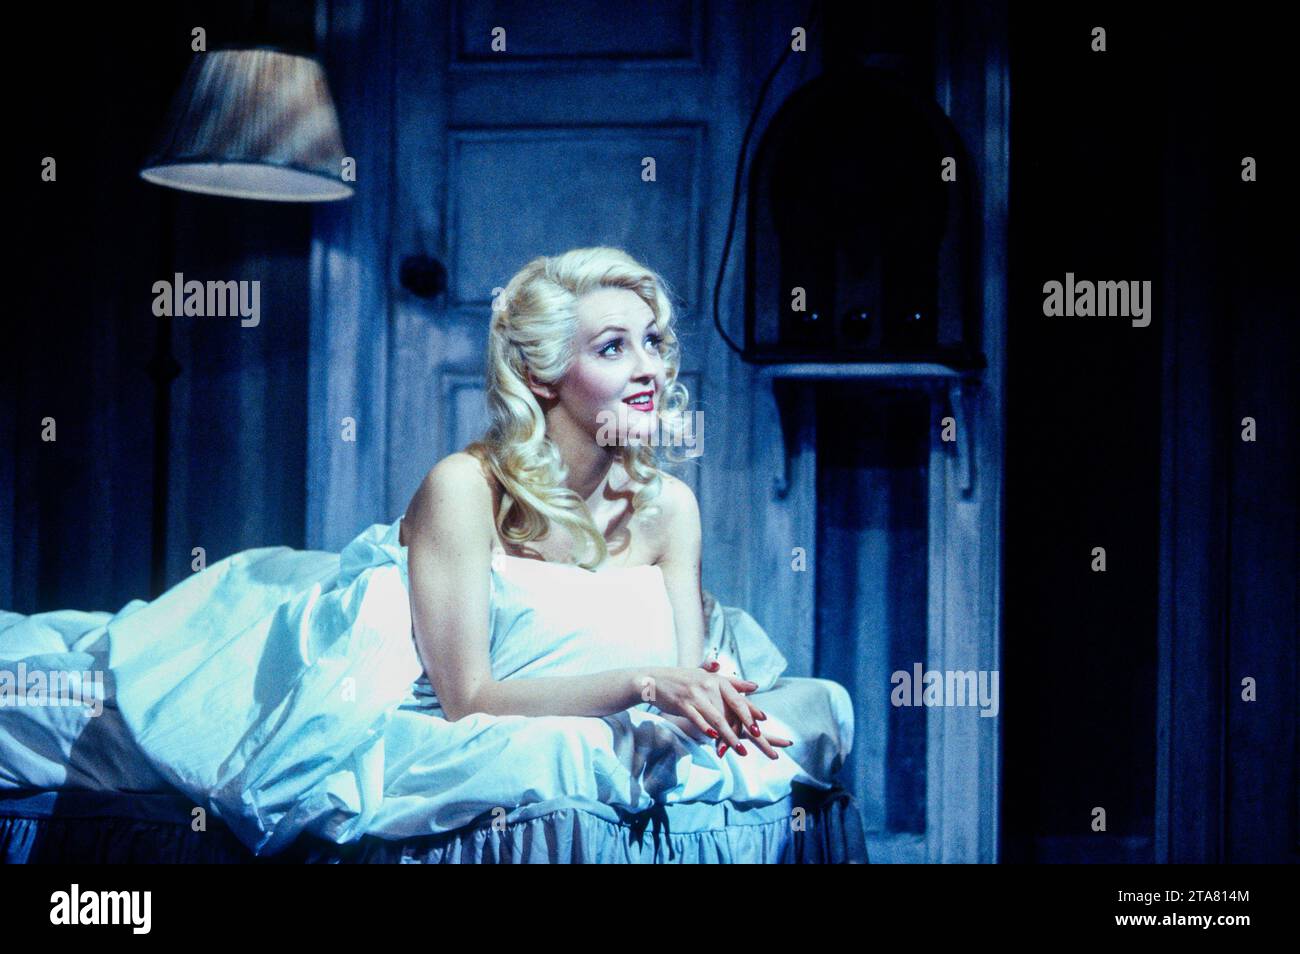 Sarah-Jane Hassell (Mallory Kingsley / Avril Raines) in CITY OF ANGELS at the Prince of Wales Theatre, London W1  30/03/1993  book: Larry Gelbart  music: Cy Coleman  lyrics: David Zippel  set design: Robin Wagner  costumes: Florence Klotz  lighting: Paul Gallo  fights: B H Barry  musical staging: Walter Painter  director: Michael Blakemore Stock Photo